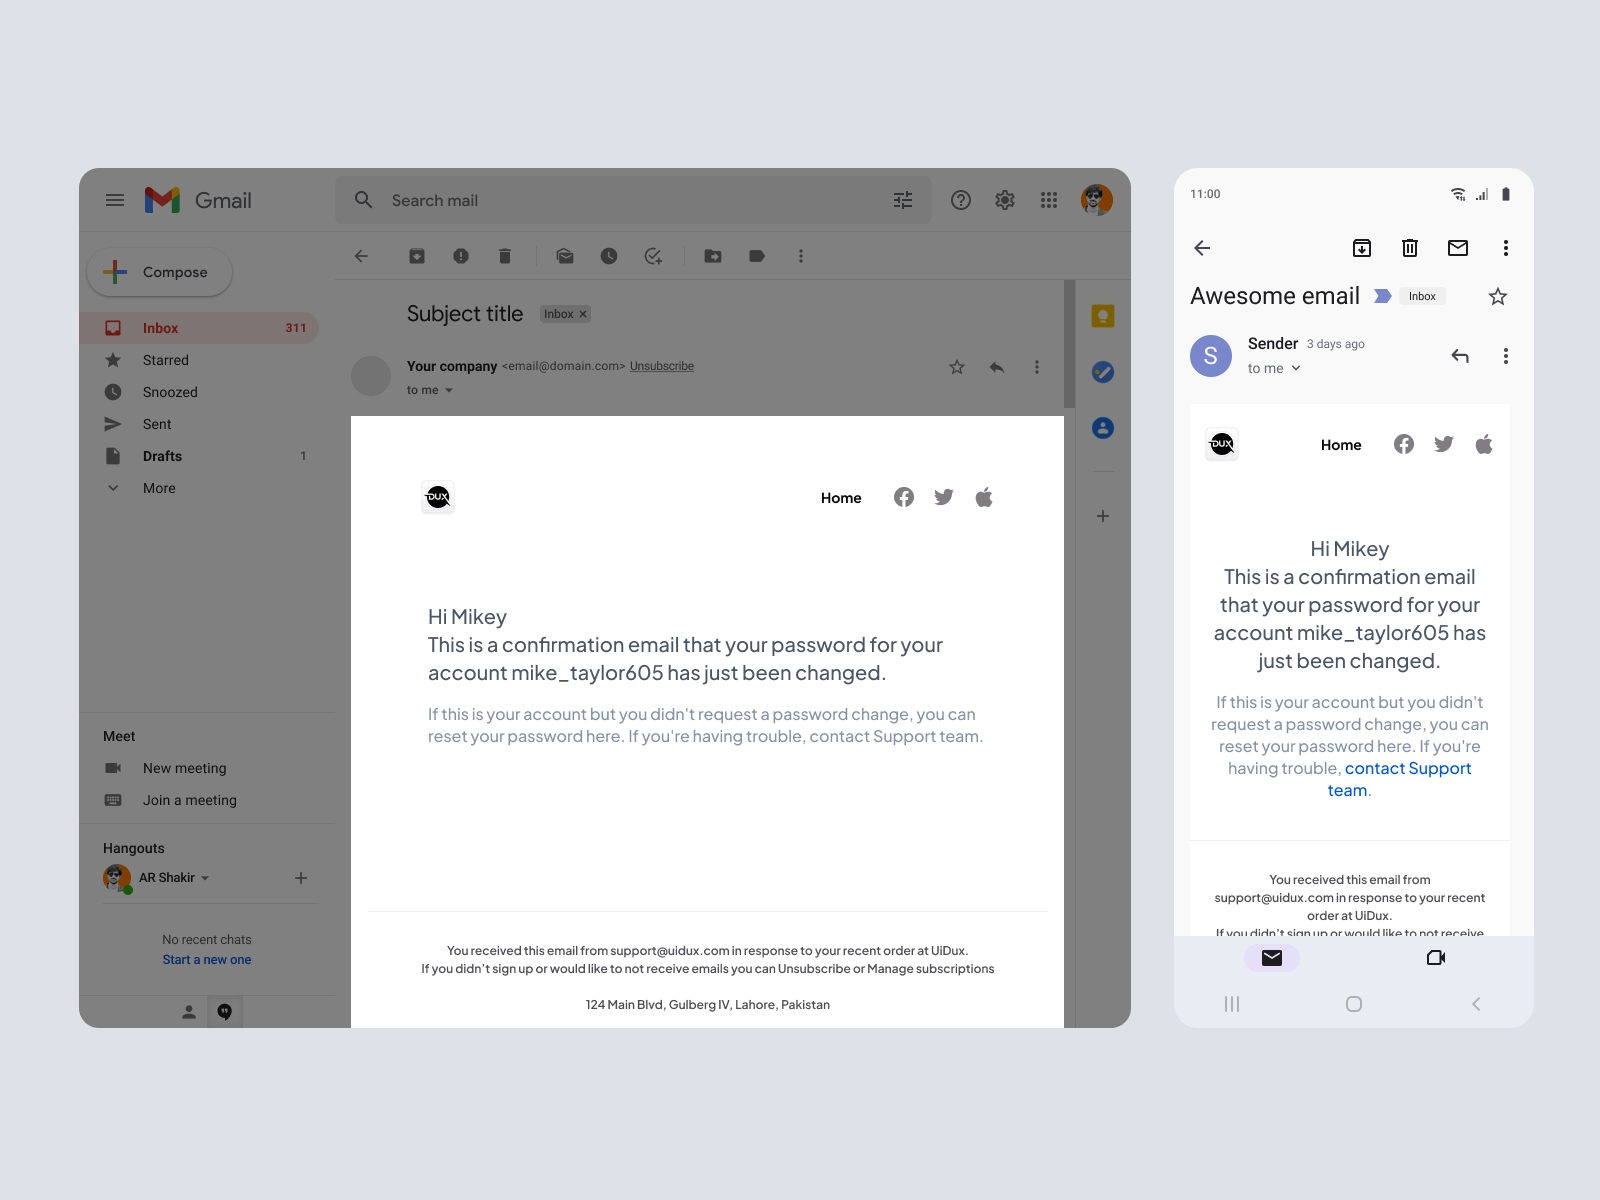 Email Design Templates - Password Changed Confirmation Email for Figma and Adobe XD - screen 1